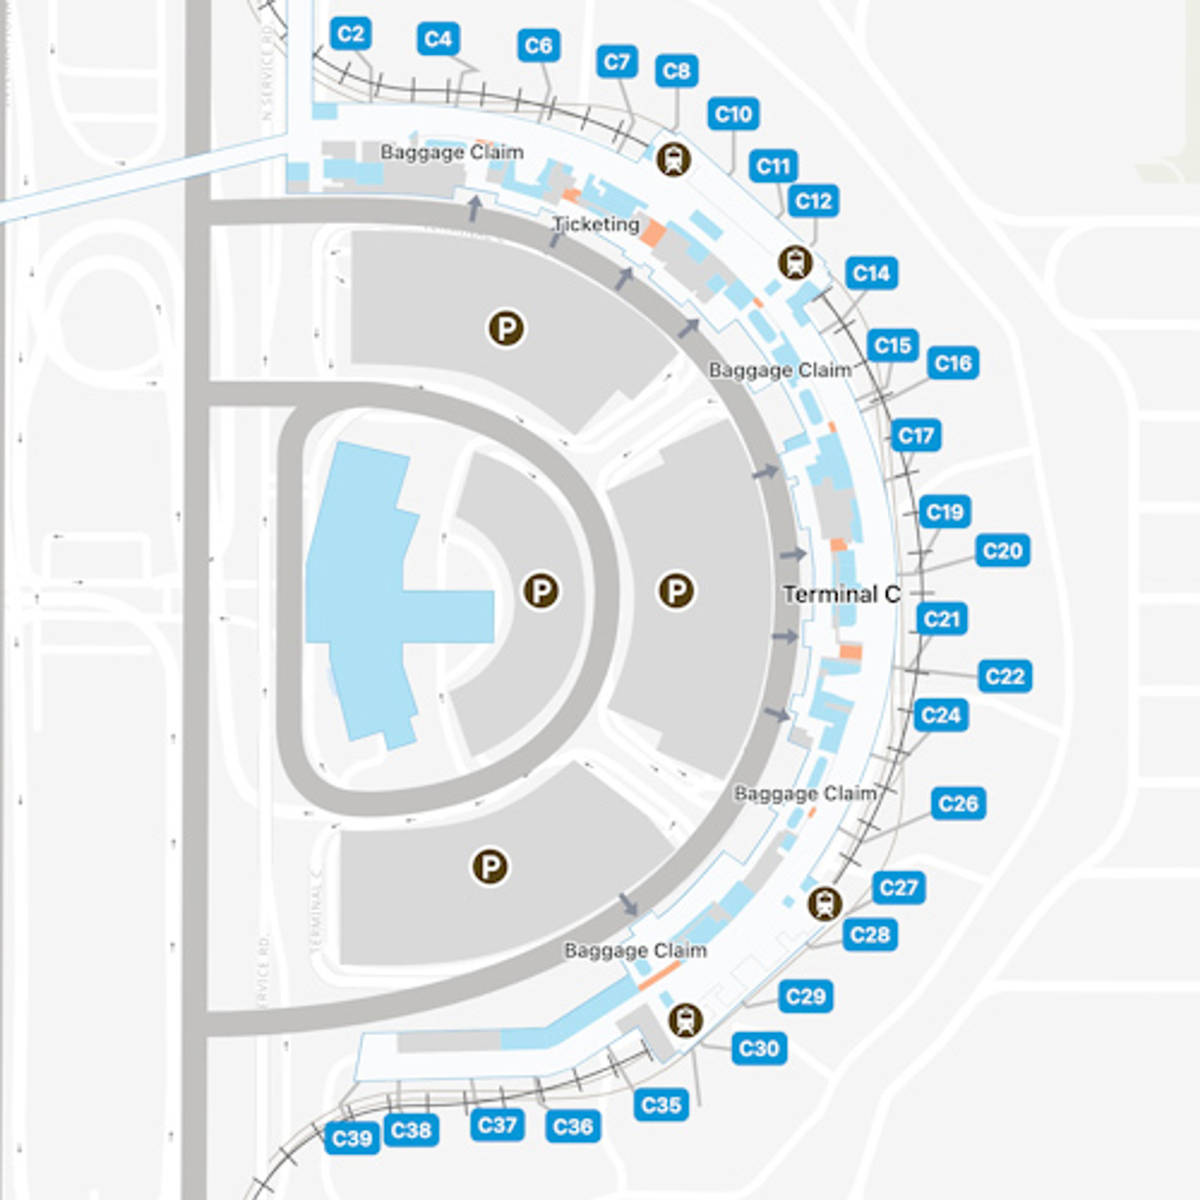 Dallas Fort Worth Airport Map | DFW Terminal Guide